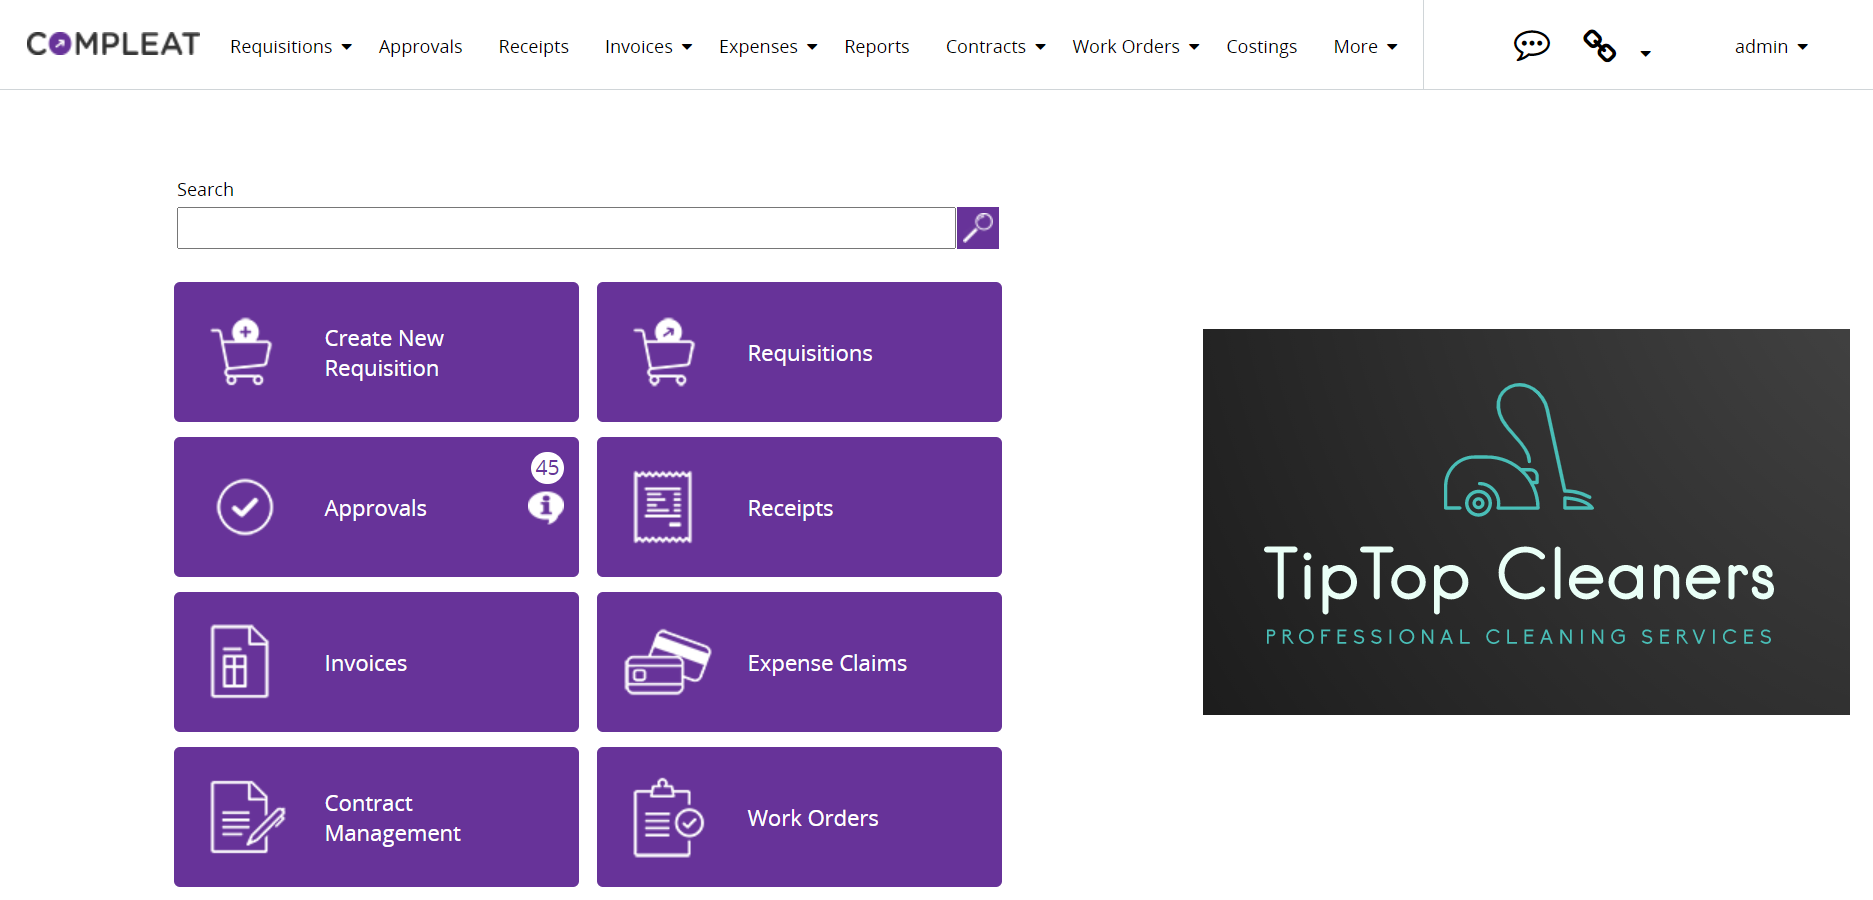 TipTop_Cleaners_Compleat_homepage.png